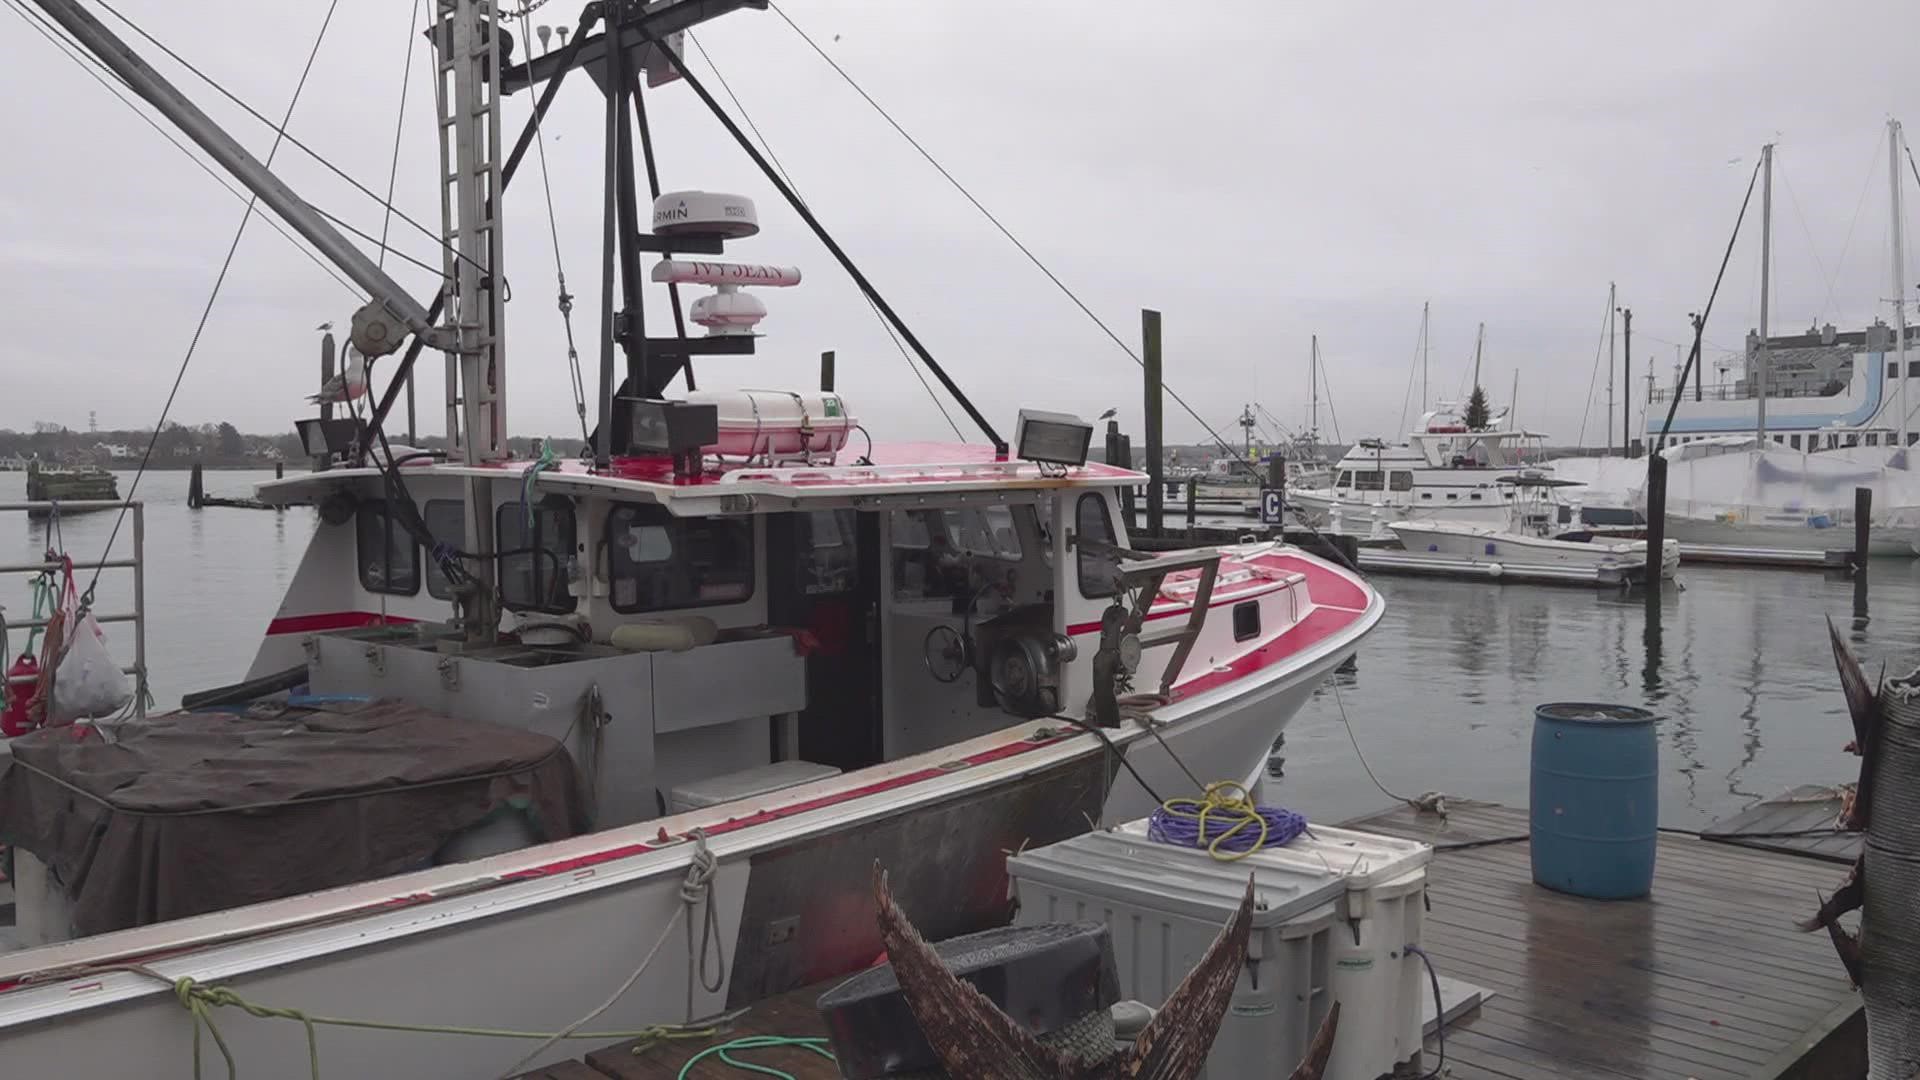 On Jan. 1, all lobstermen in Maine had to begin reporting their catch to the state.